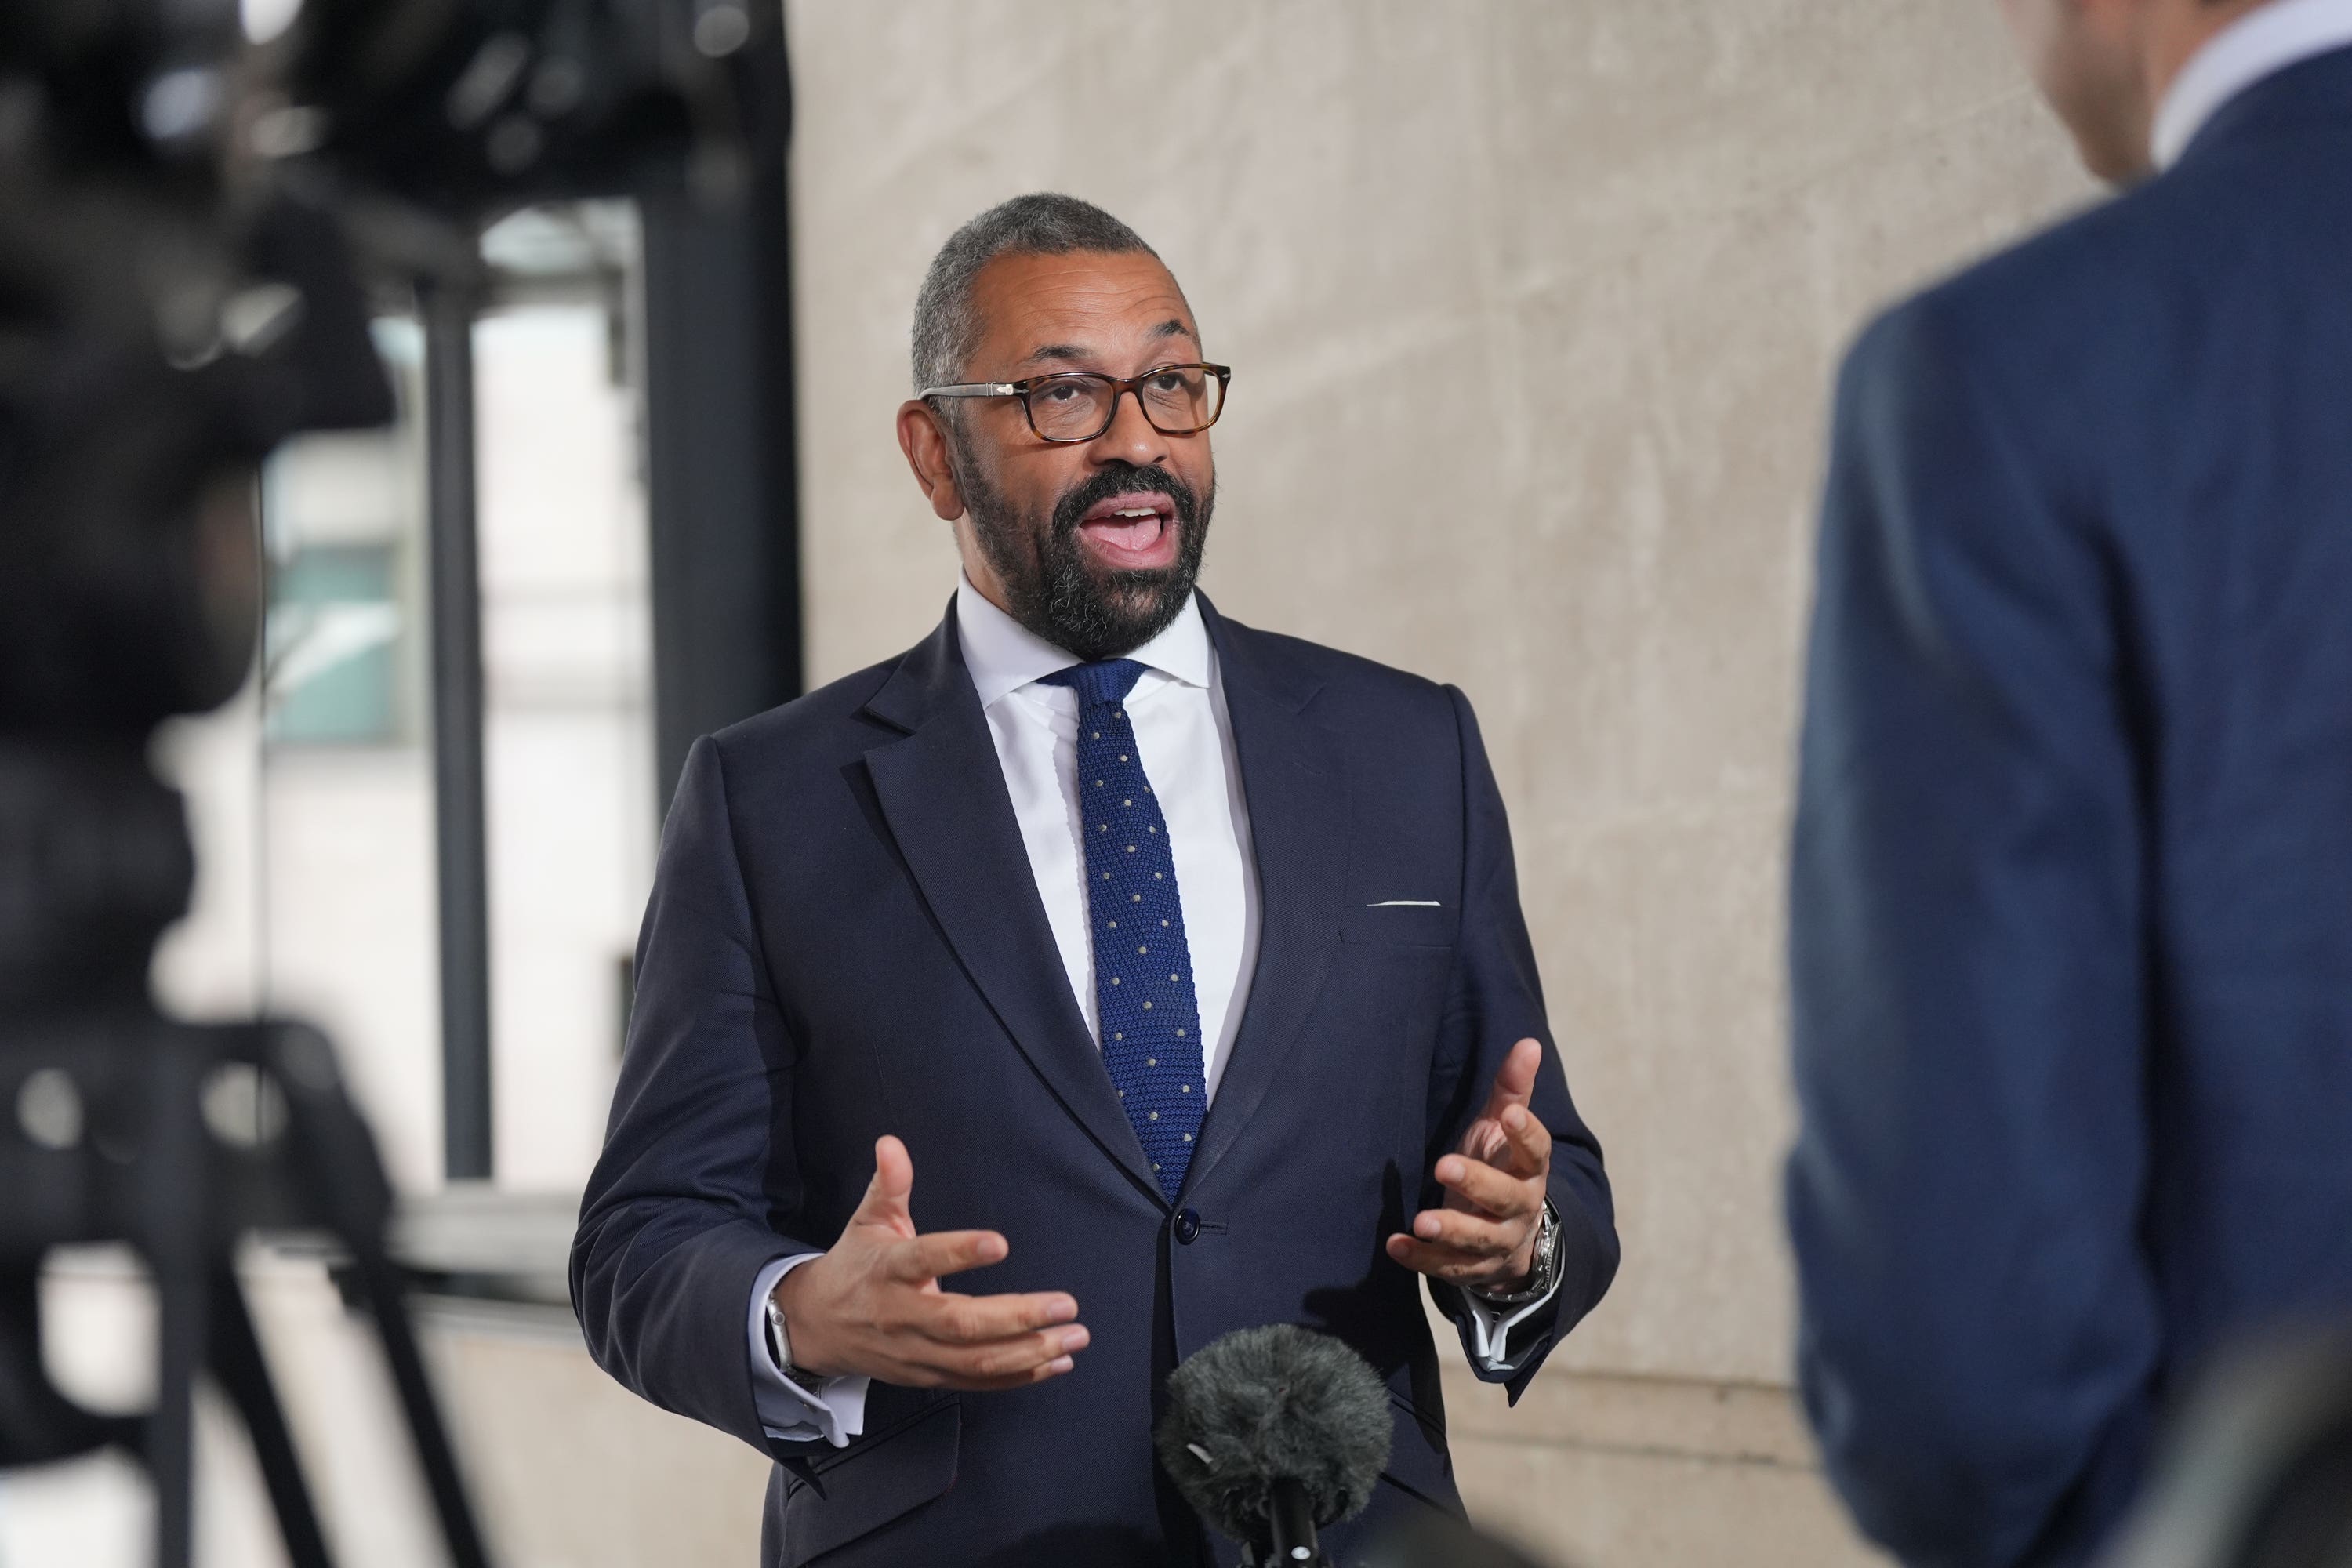 Home secretary James Cleverly speaks to the media outside BBC Broadcasting House